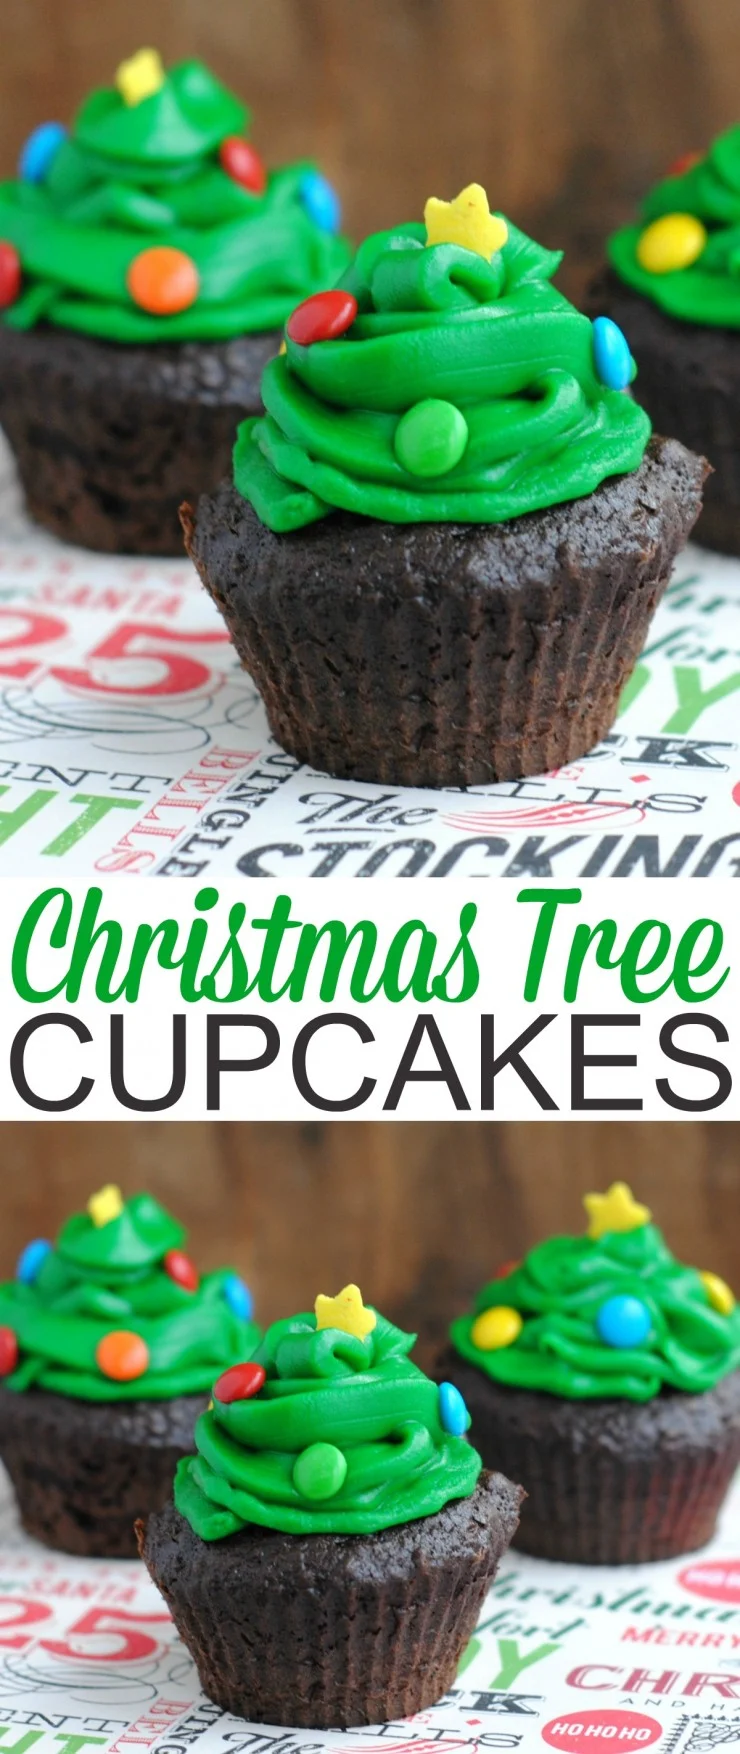 These Christmas Tree Cupcakes are a great Christmas party idea that are so easy to put together and perfectly seasonal. Aren't they adorable?